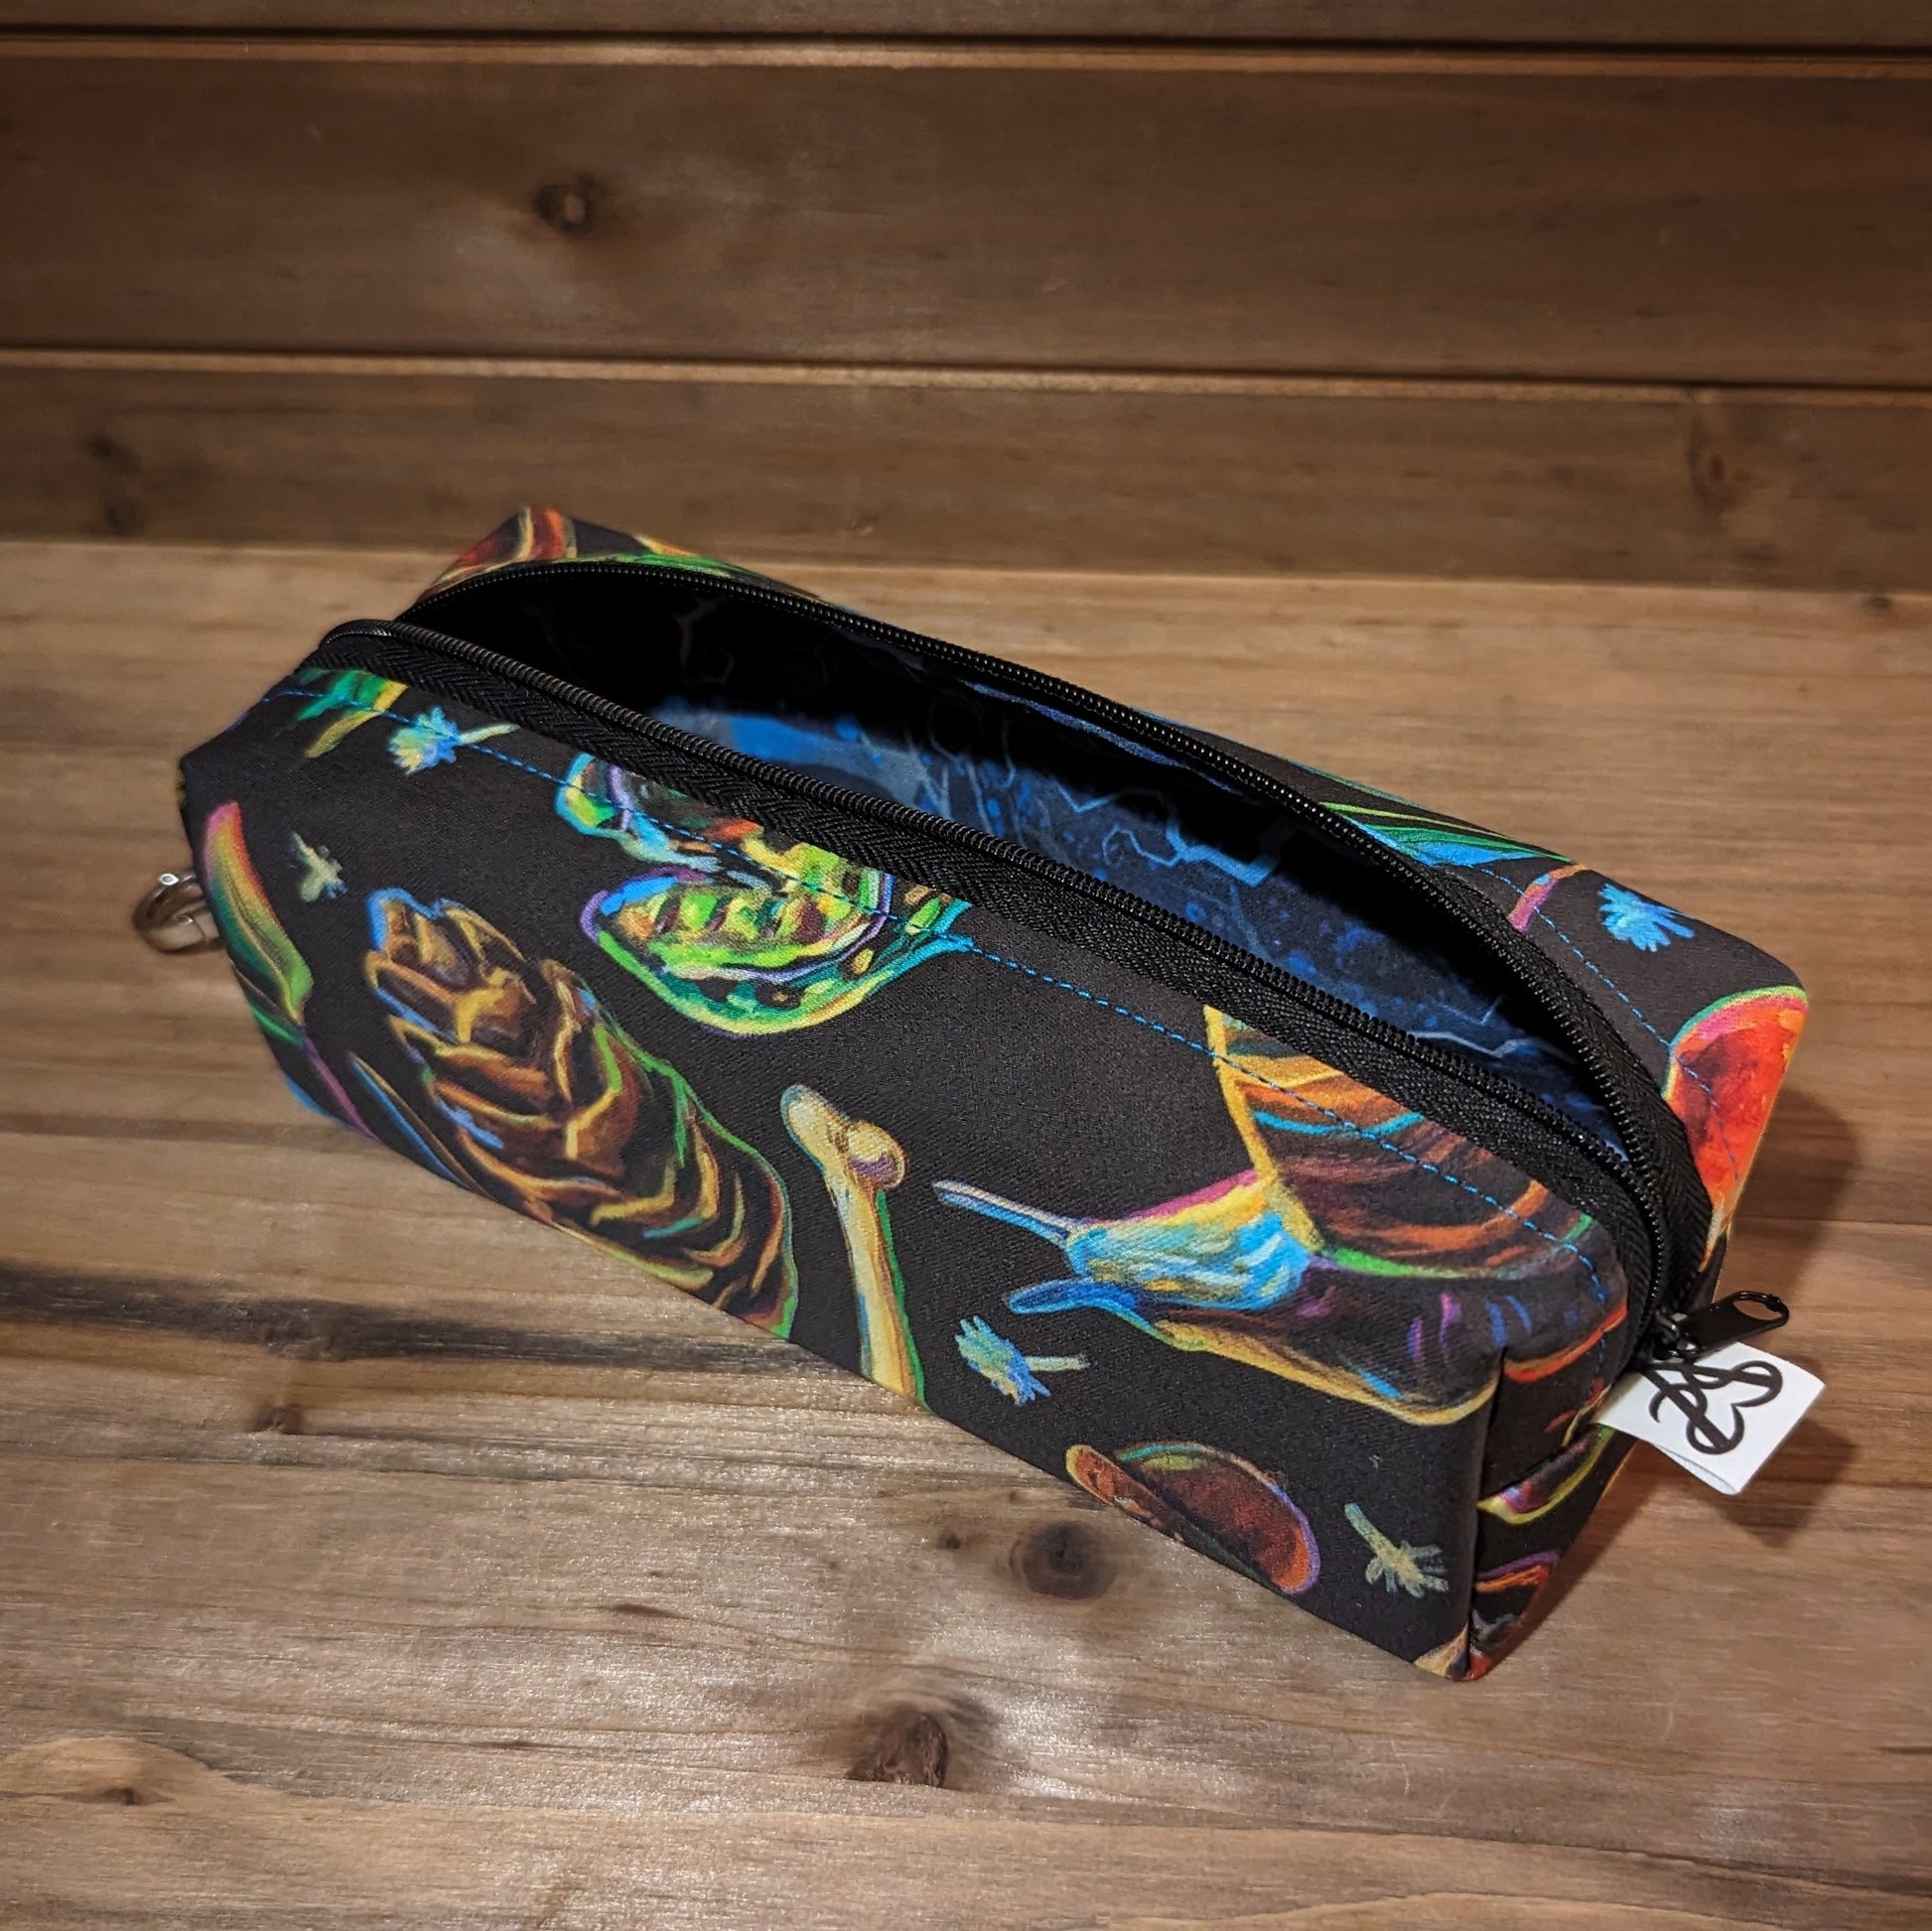 A long bag with box ends has a colorful forest pattern with pinecones, snails, frogs, acorns, florals, and keys, a black zipper down the middle open to show the blue spindly tree fabric inside, and a keychain clip on the top box shaped end.